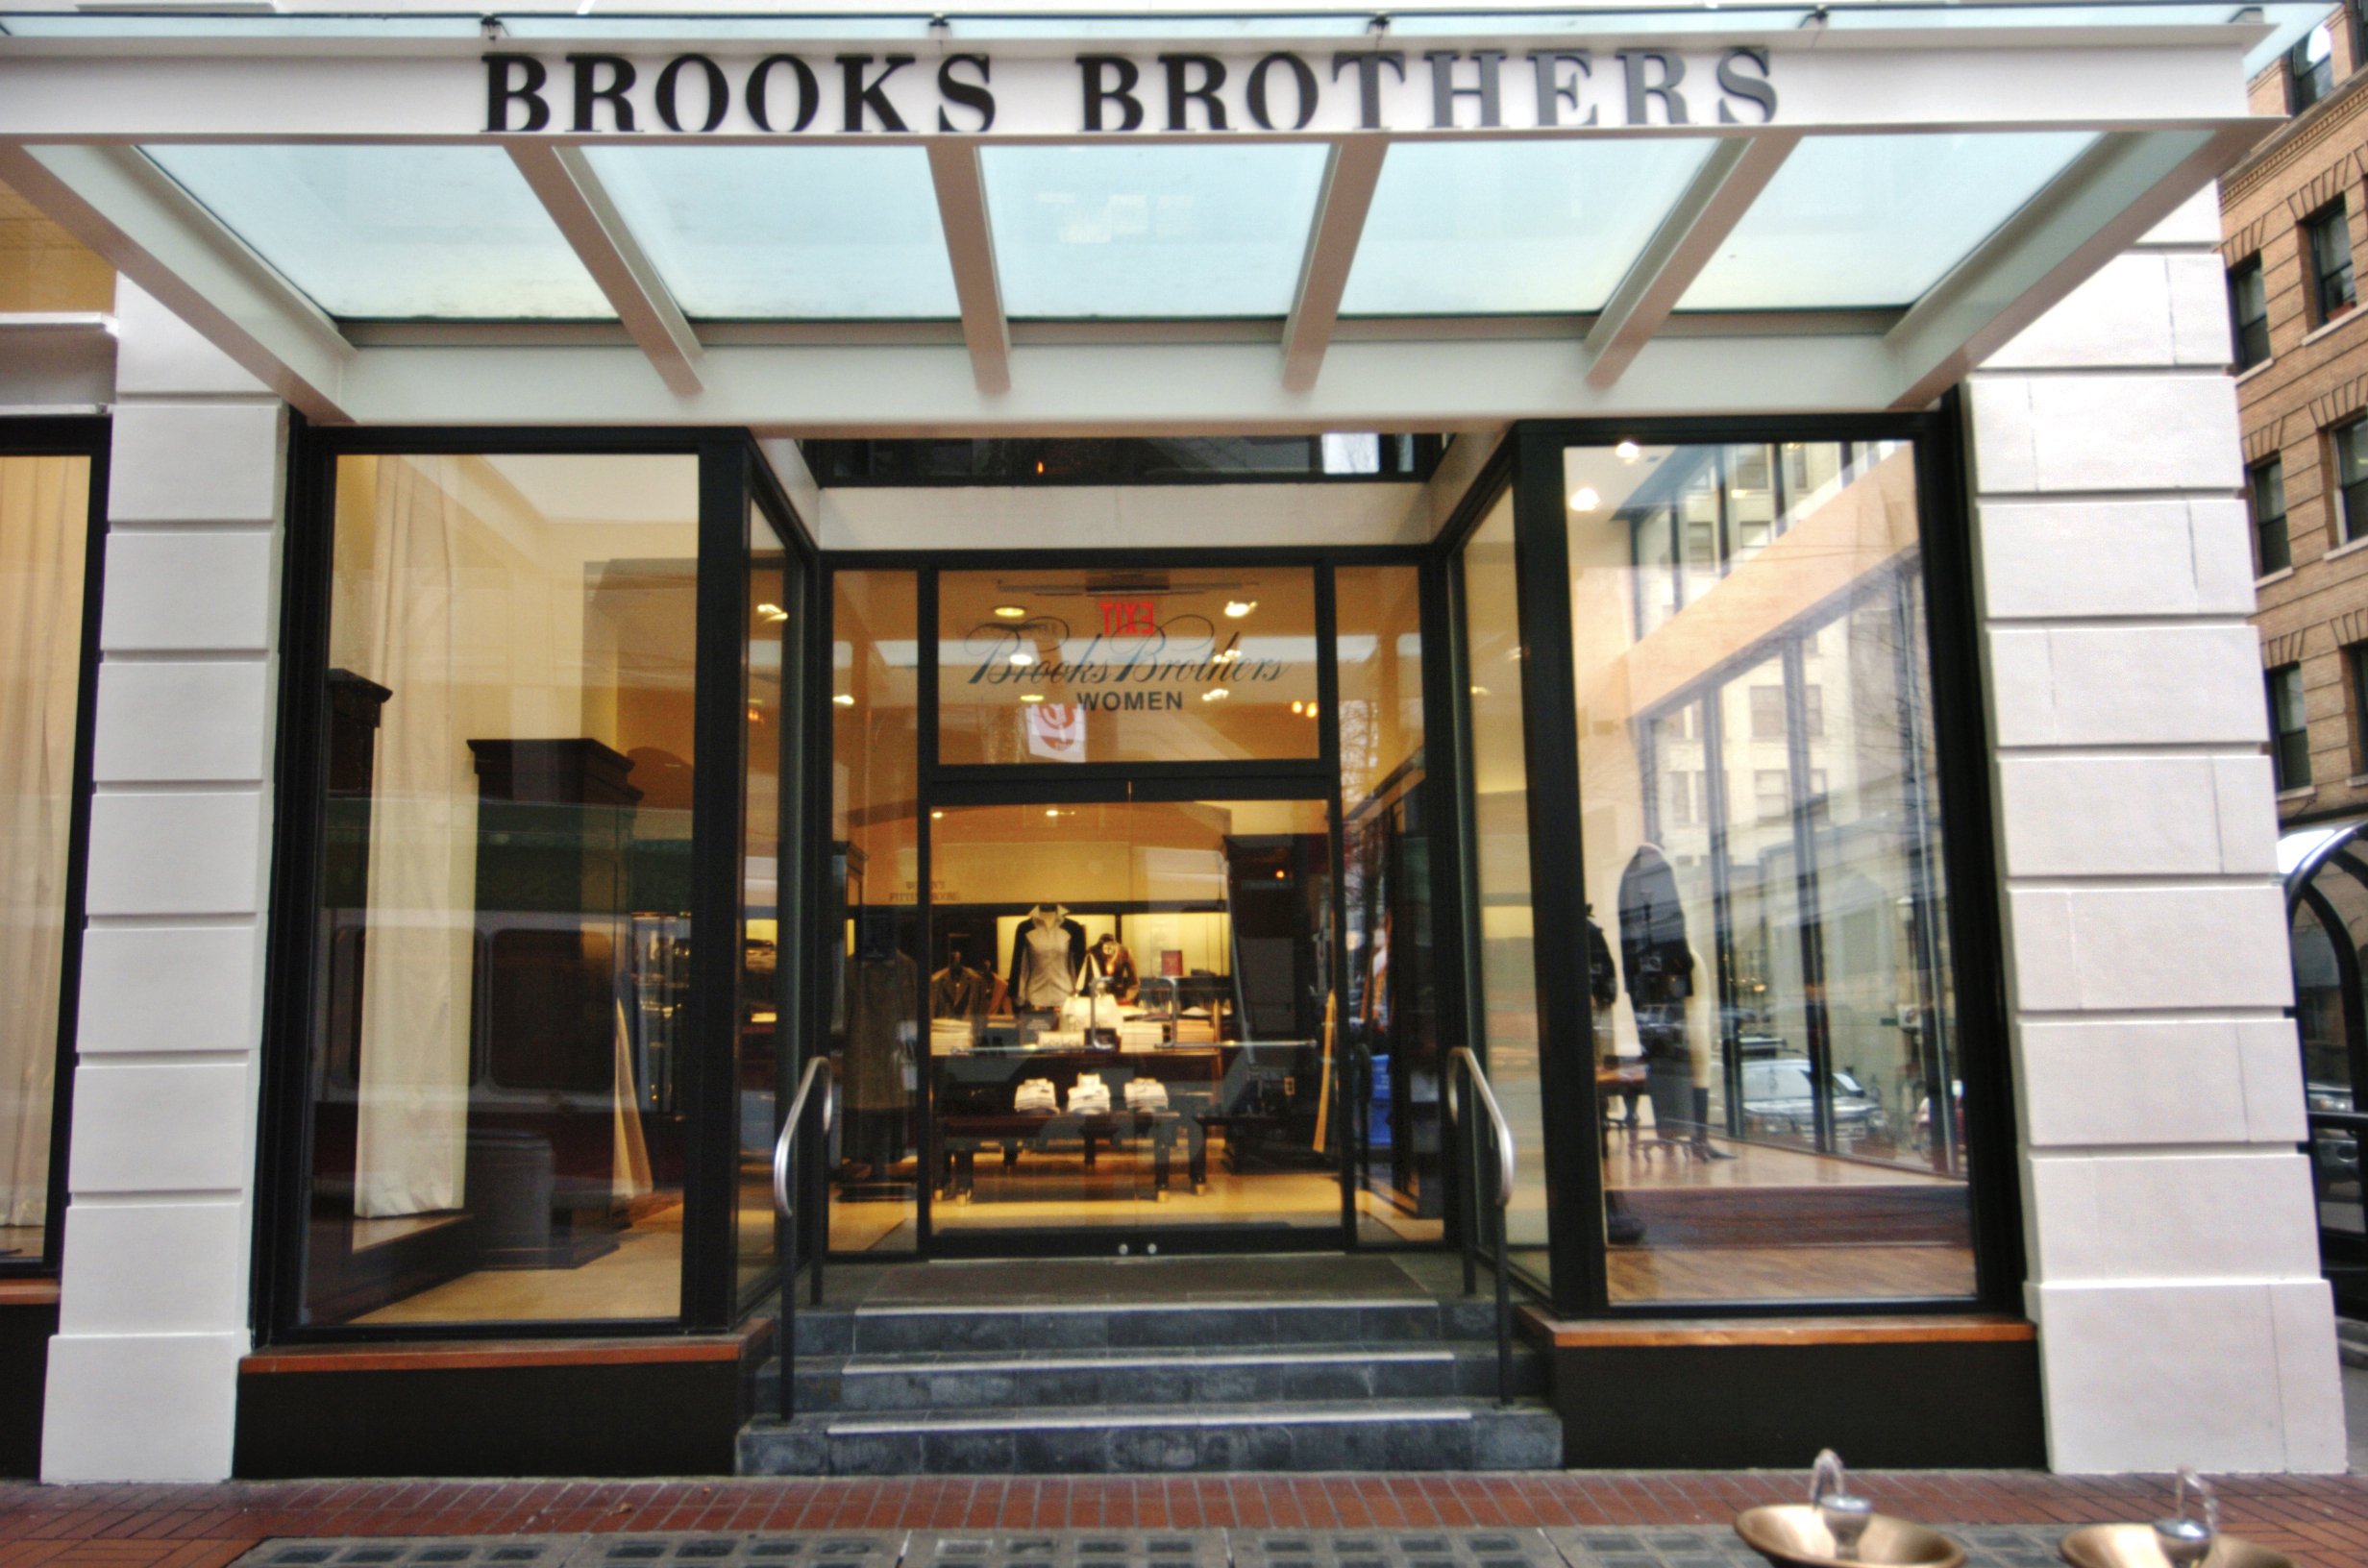 202-year-old Brooks Brothers prepping 